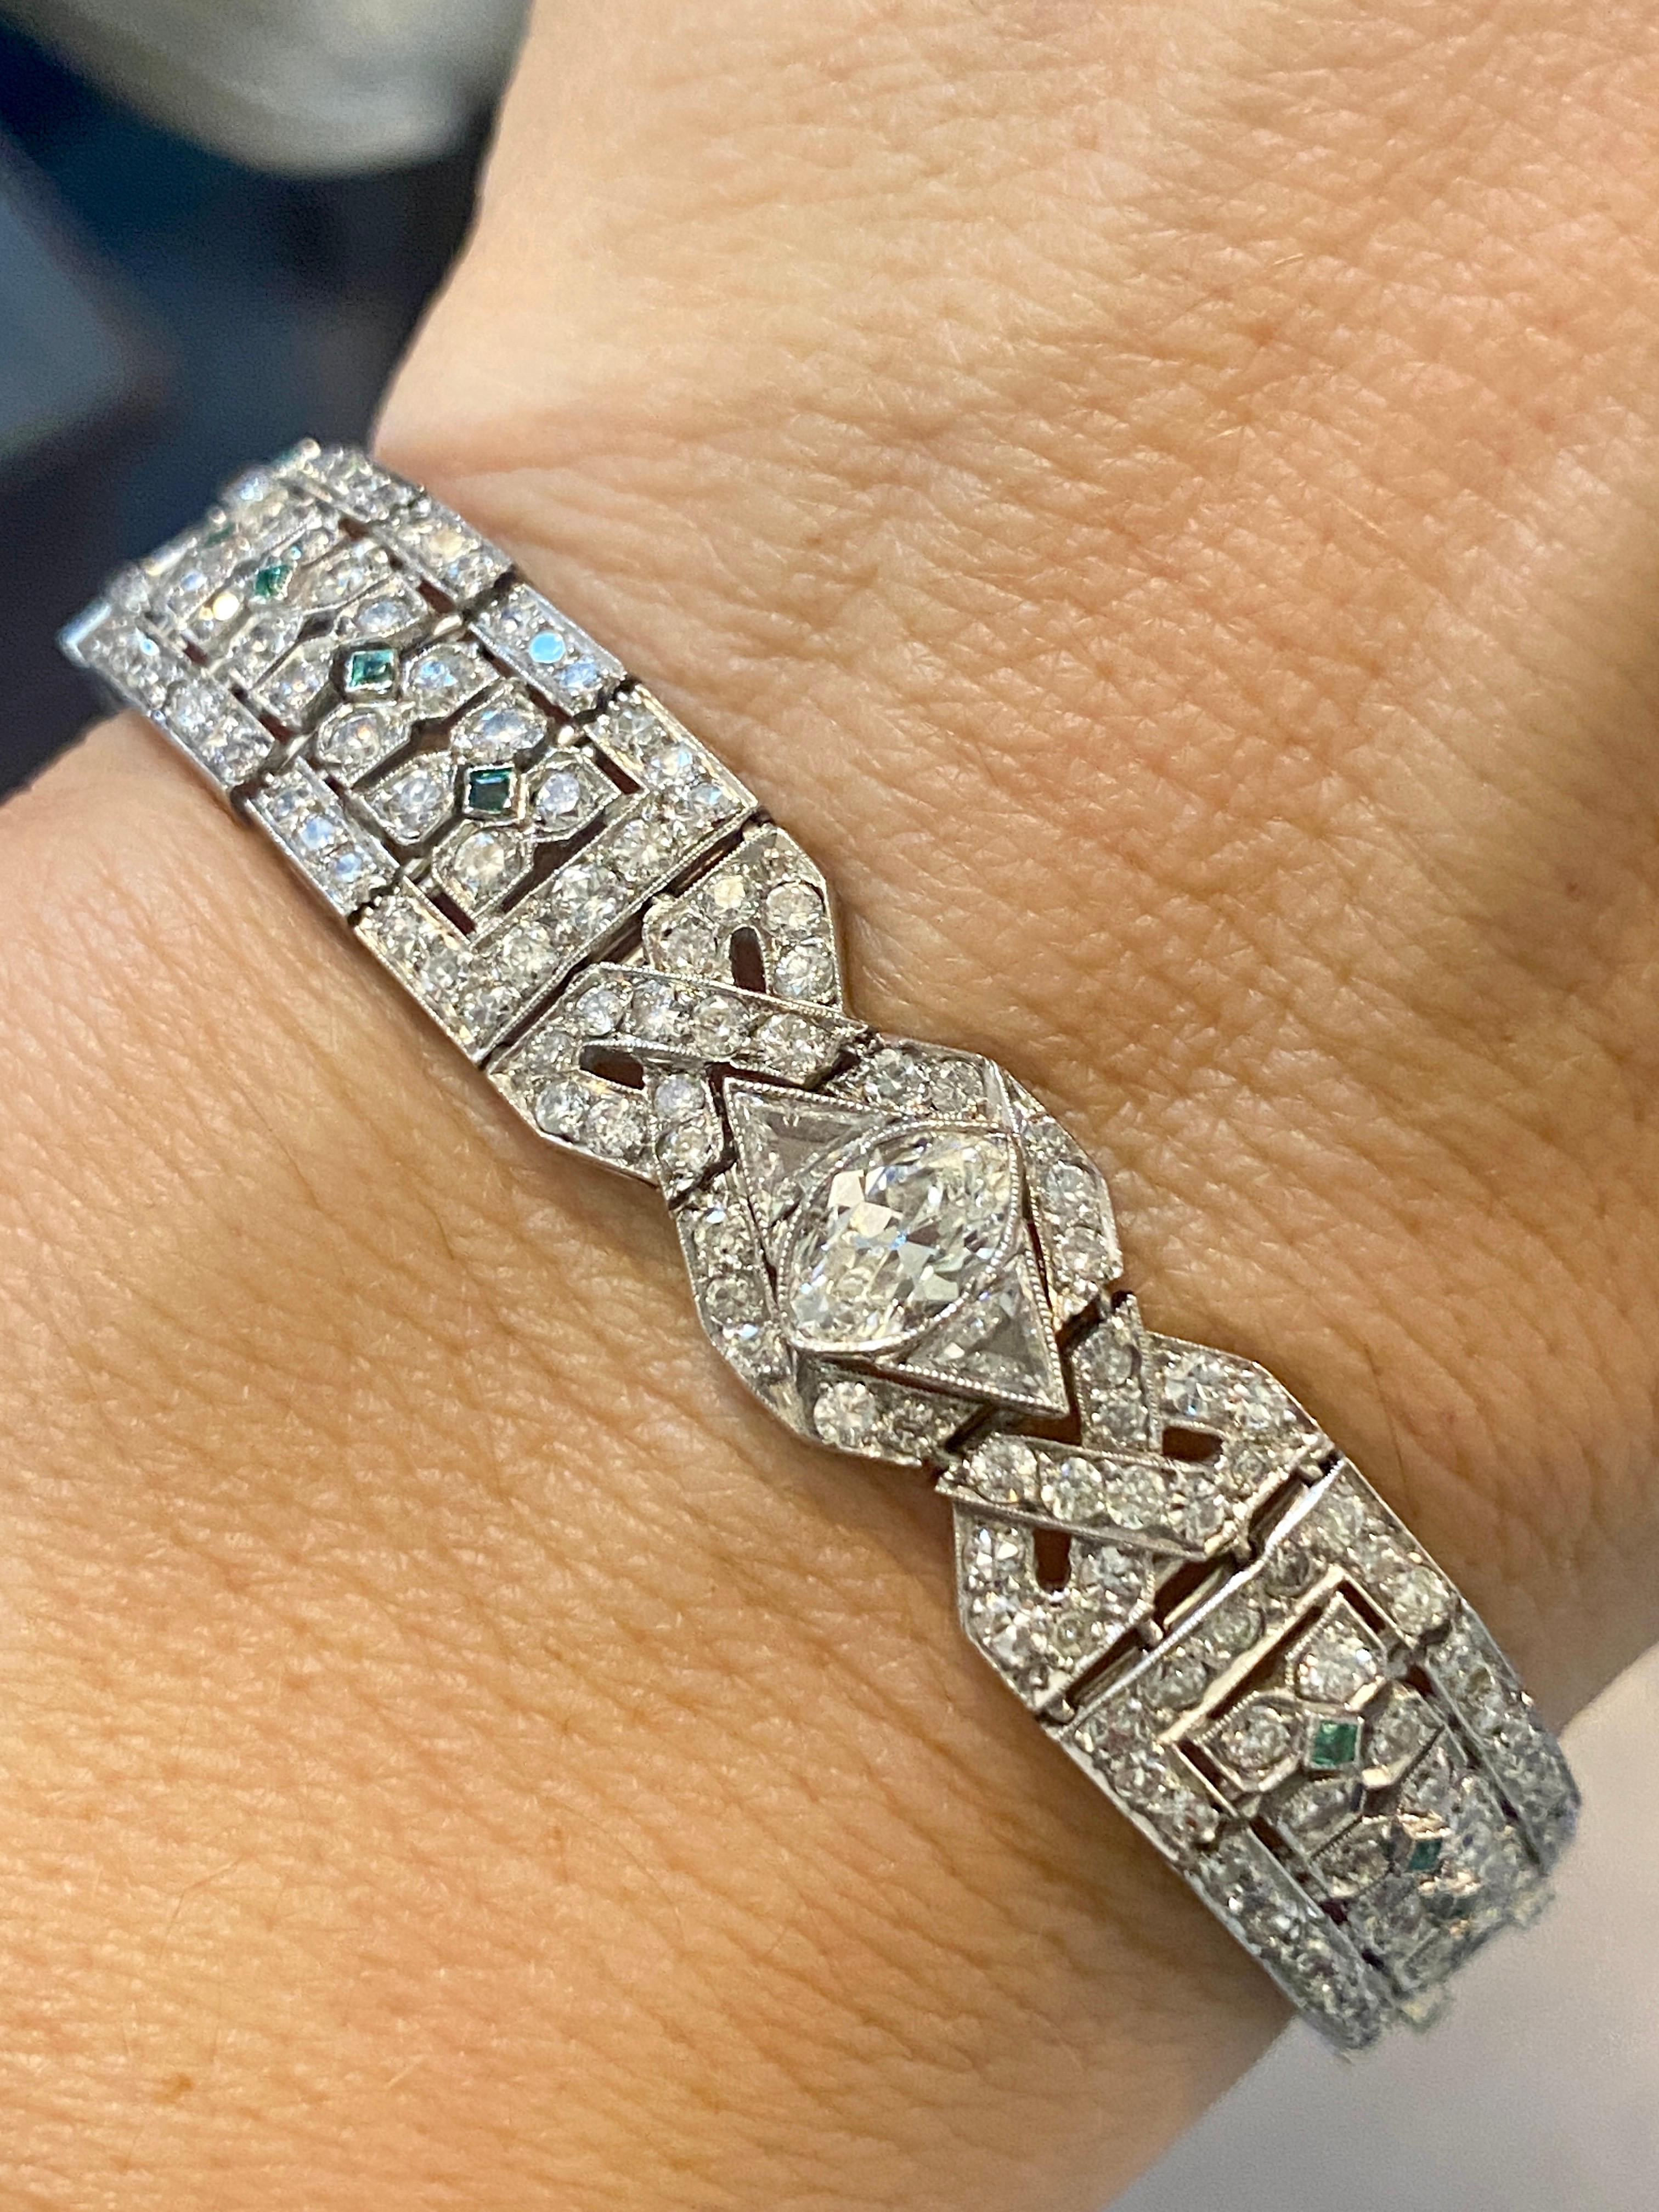 This exquisite Art Deco bracelet is made of platinum and adorned with approximately 10 carats of Old European diamonds. There are 2 prominent marquise diamonds one in the front and the other on the clasp which weigh approximately 0.75 carats each.